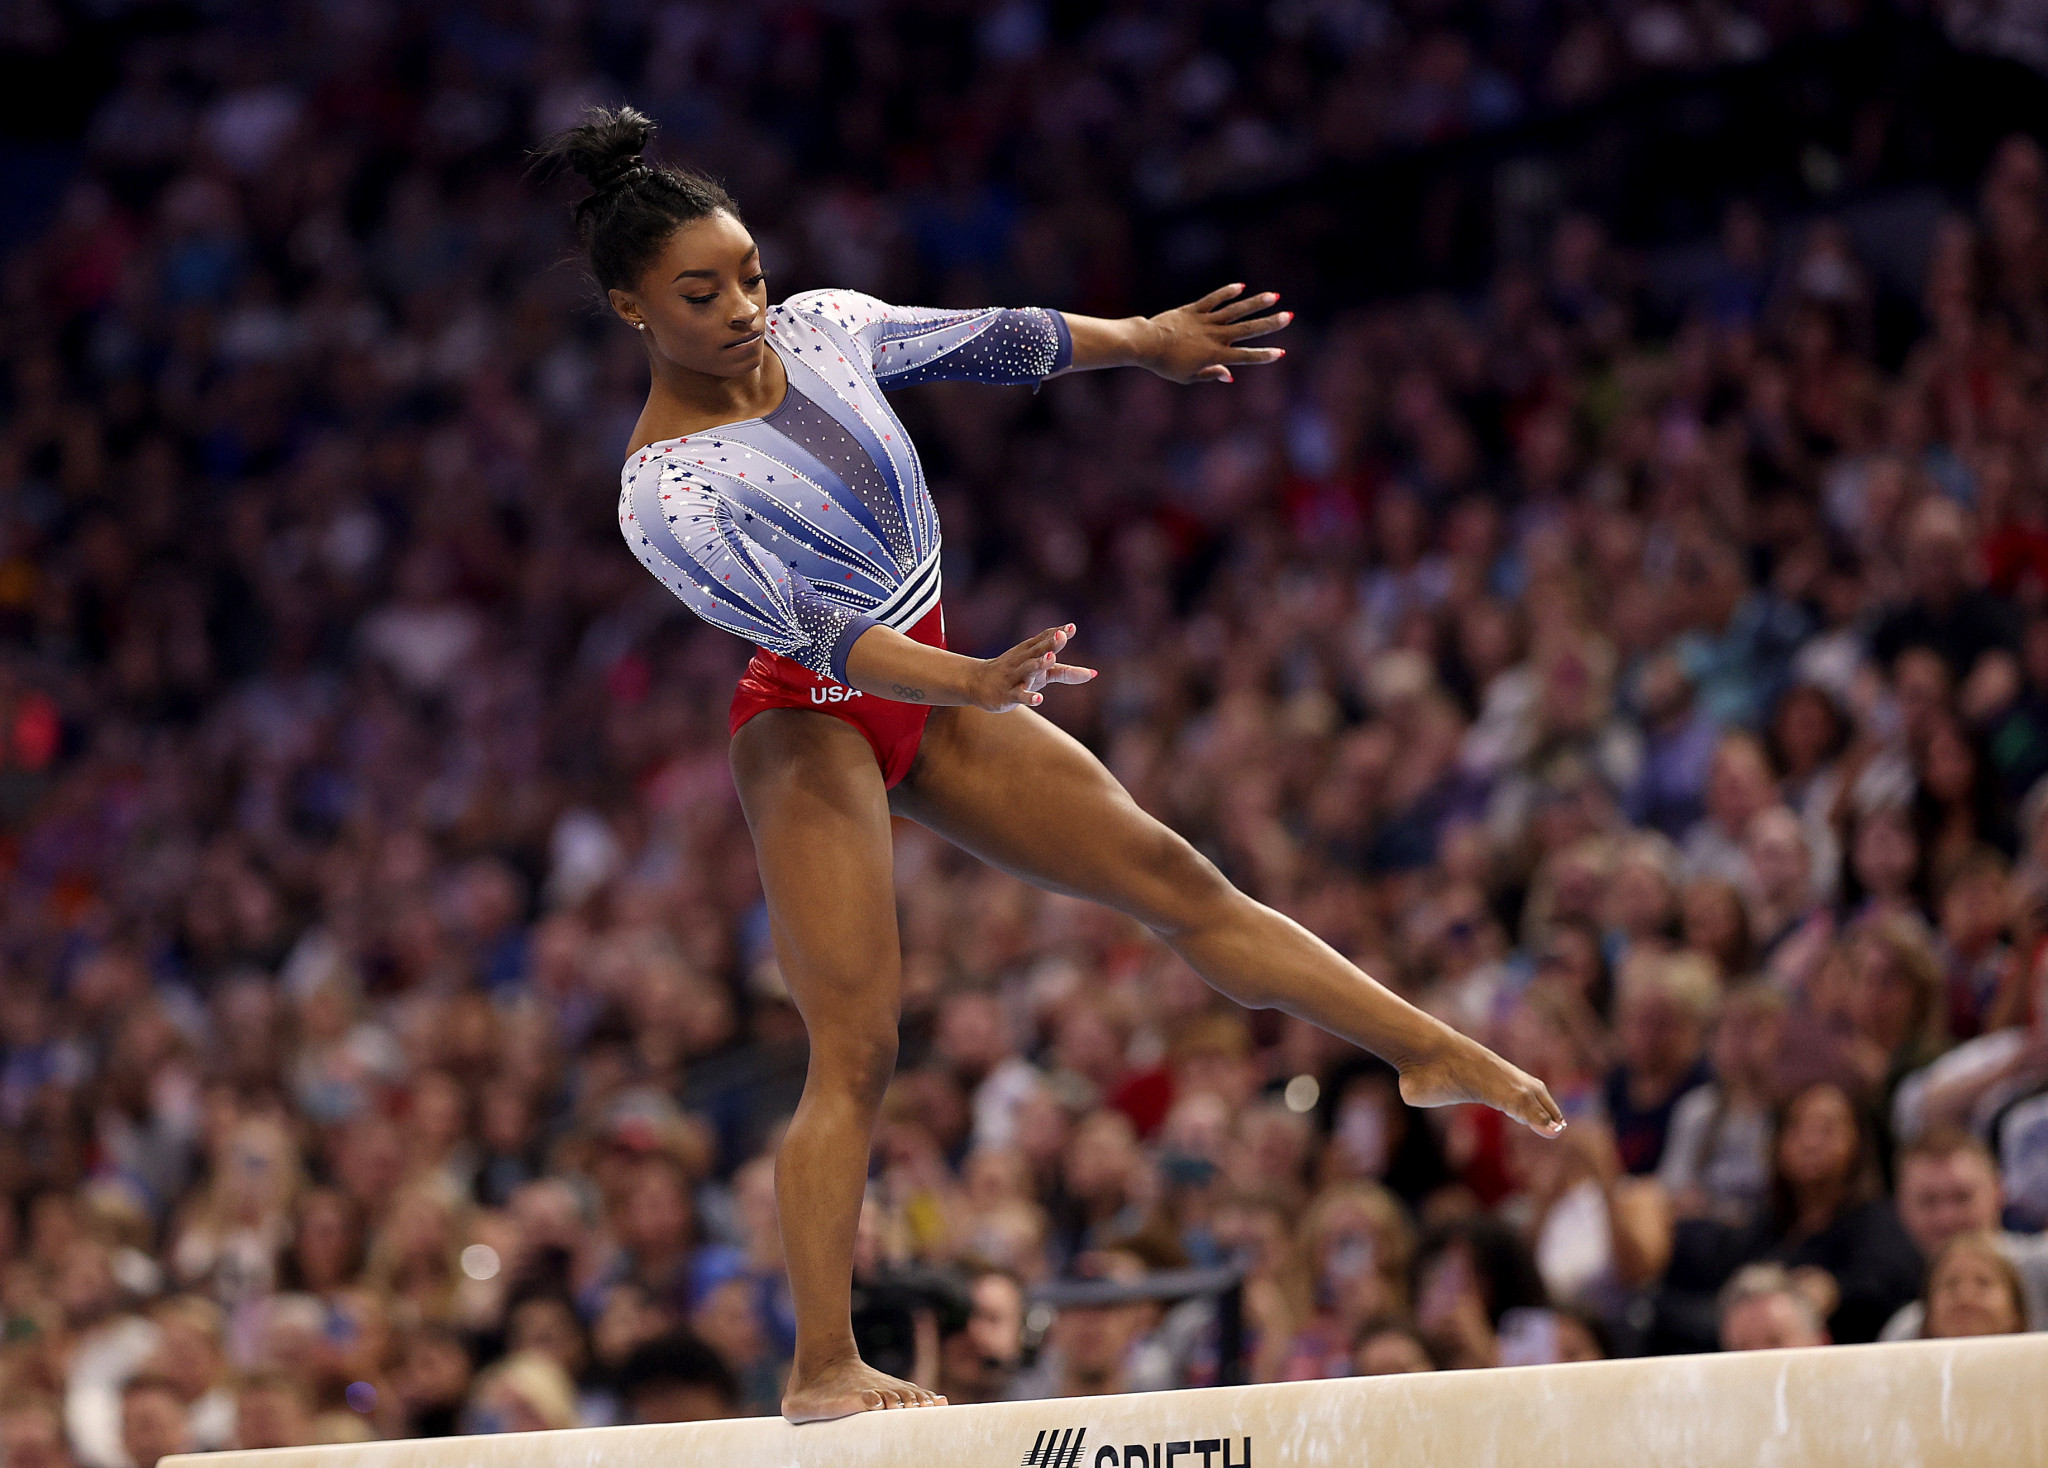 Gymnastic star Simone Biles is eyeing gold at the upcoming Olympics in Paris. GETTY IMAGES